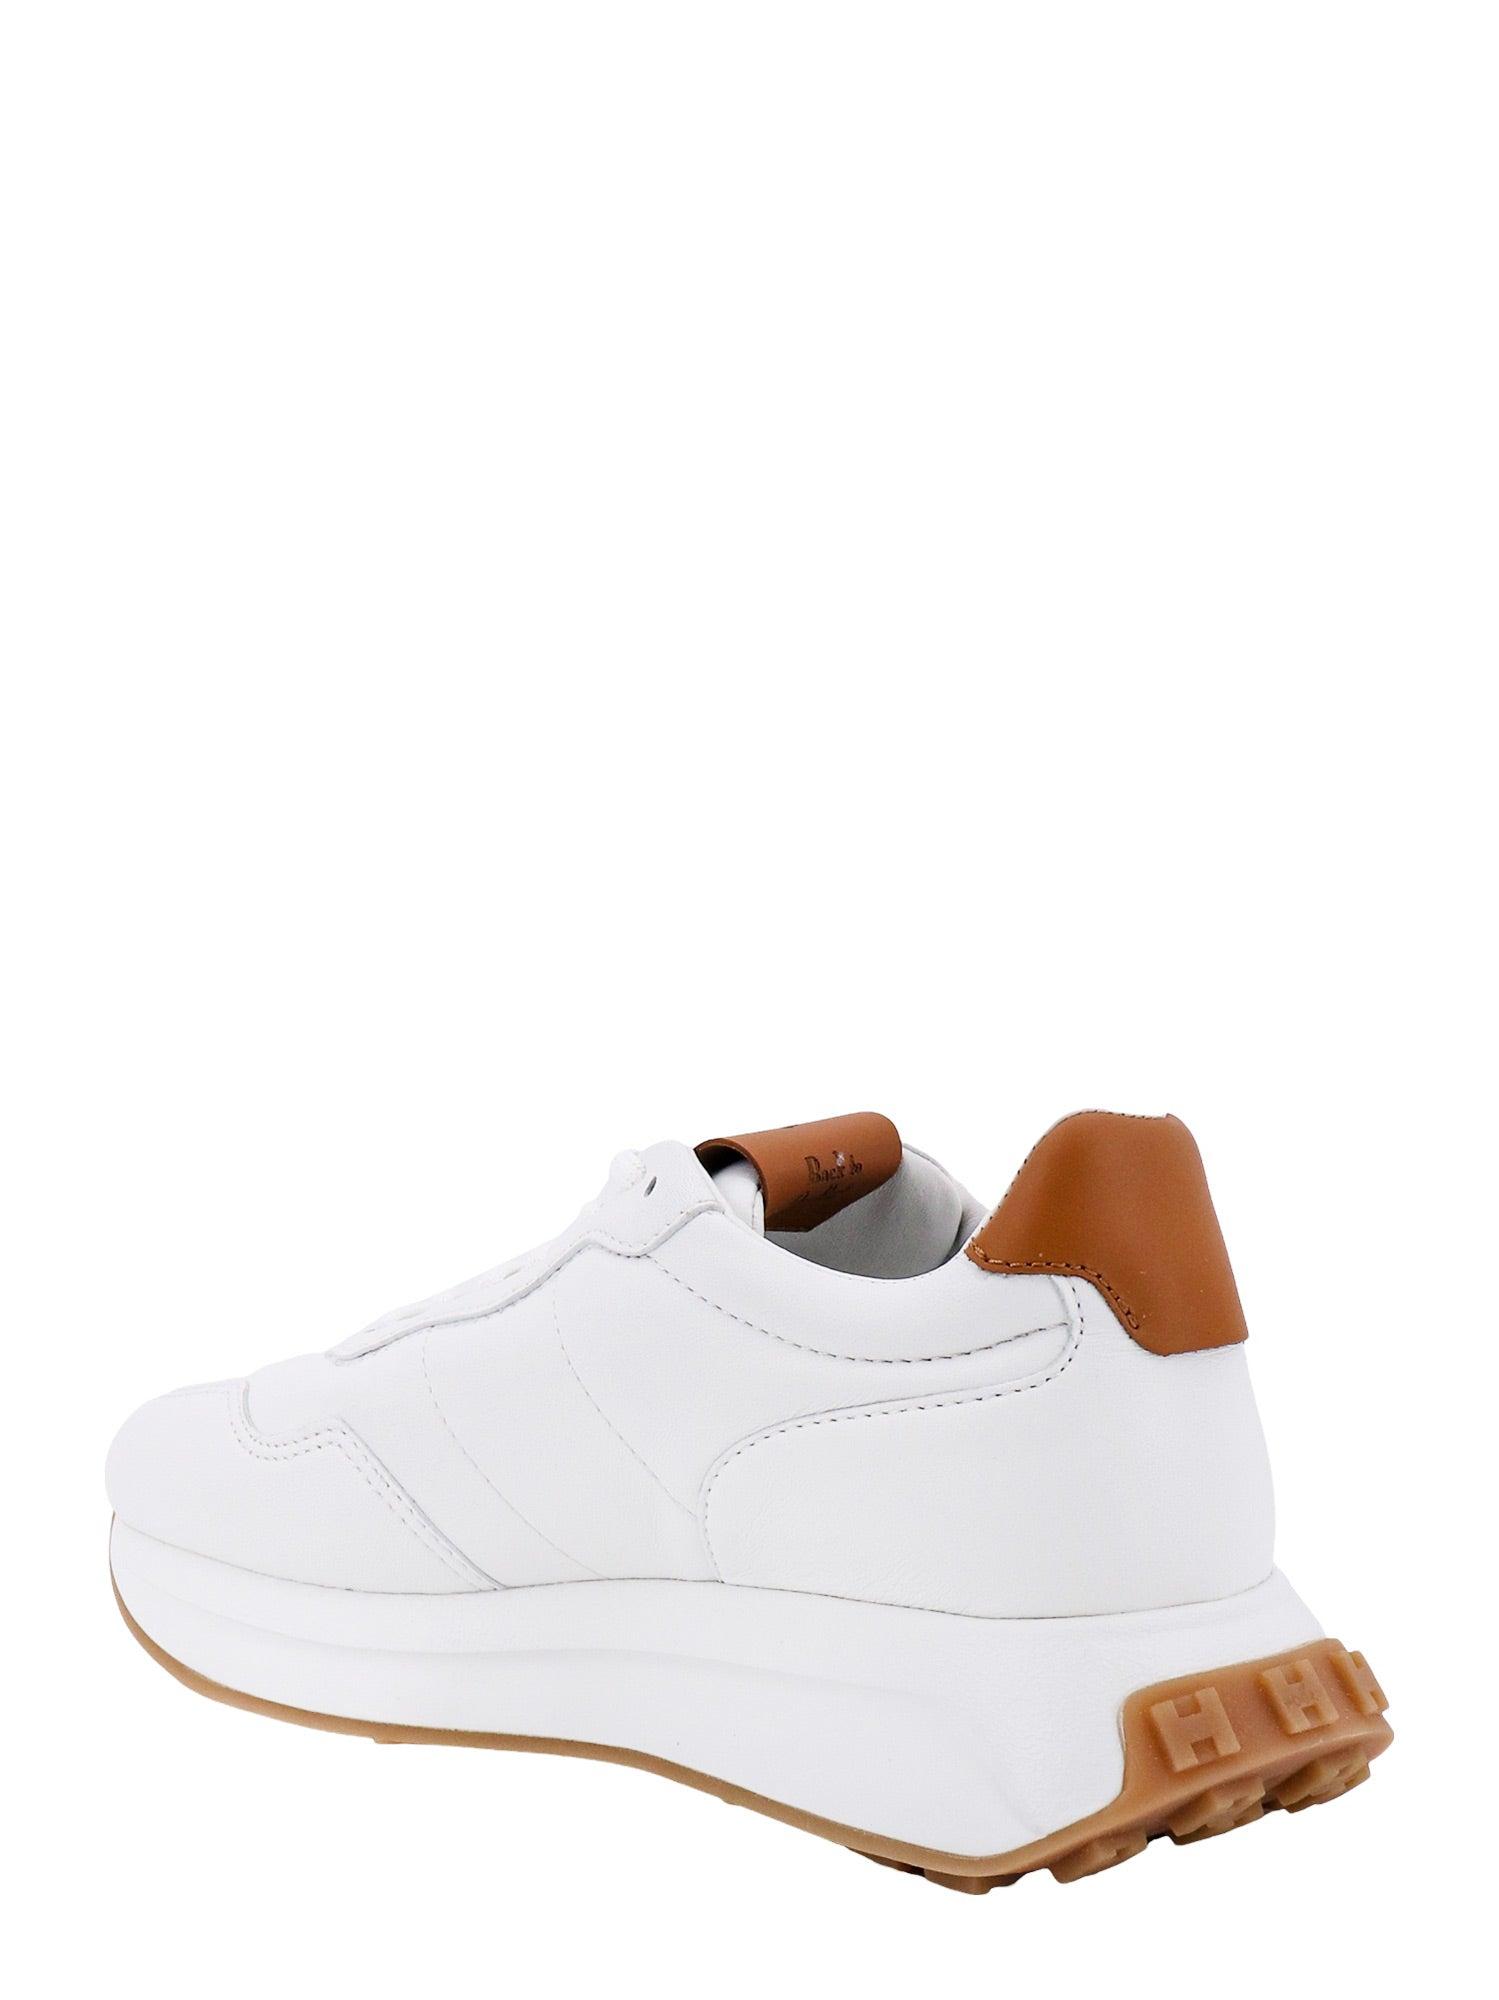 Hogan Leather Lace-up Sneakers in White | Lyst